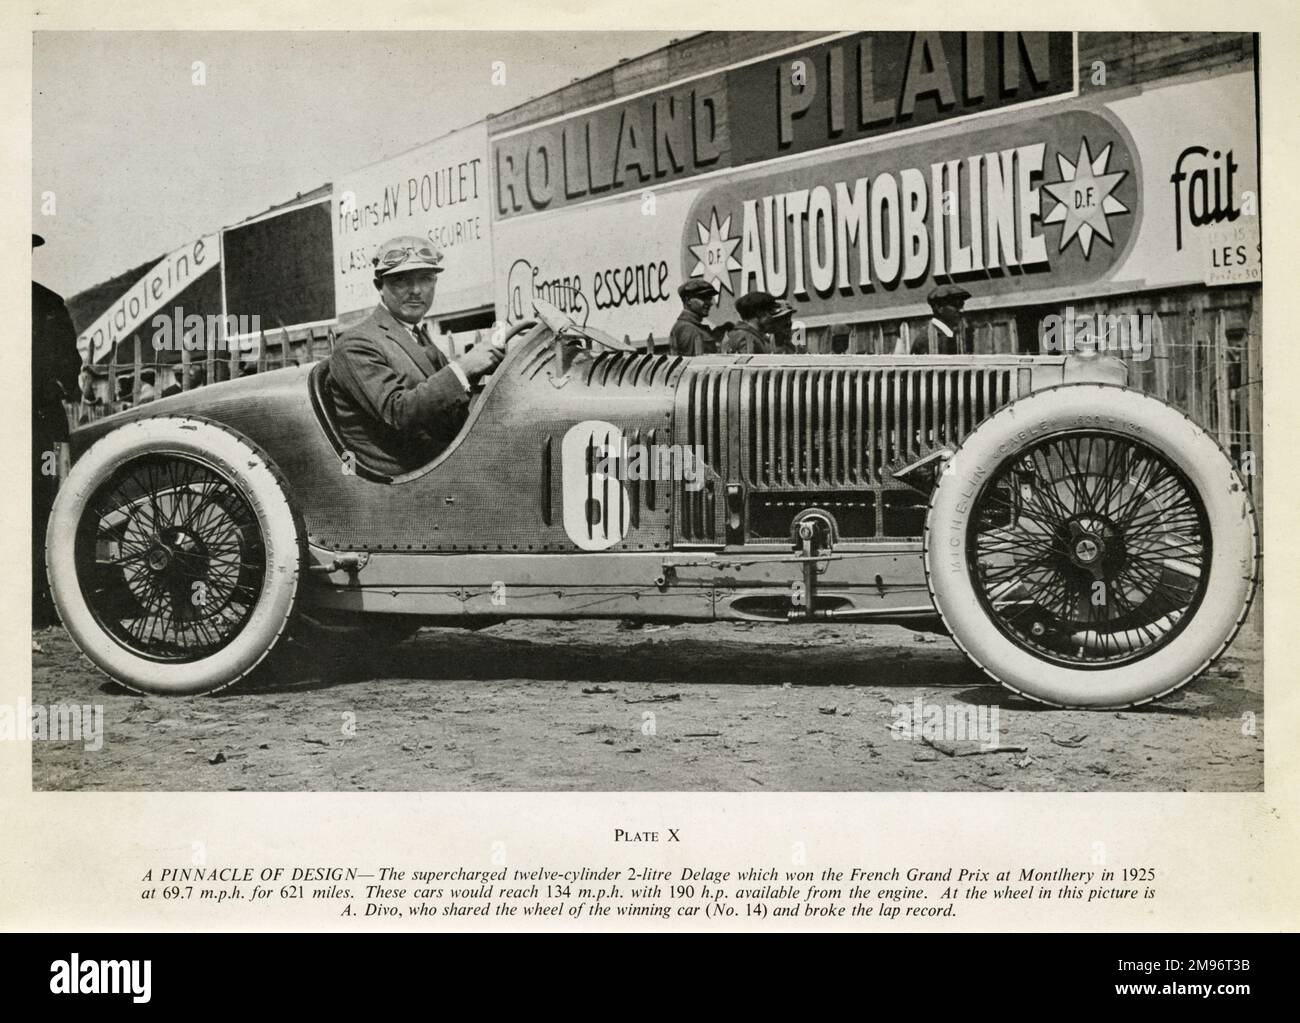 The supercharged twelve-cylinder 2 litre Delage which won the French Grand Prix at Montlhery in 1925 at 69.7 mph for 621 miles.  These cars would reach 134 mph with 190 hp available from the engine.  At the wheel in this picture is A Divo who shared the wheel of the winning car (No. 14) and broke the lap record Stock Photo